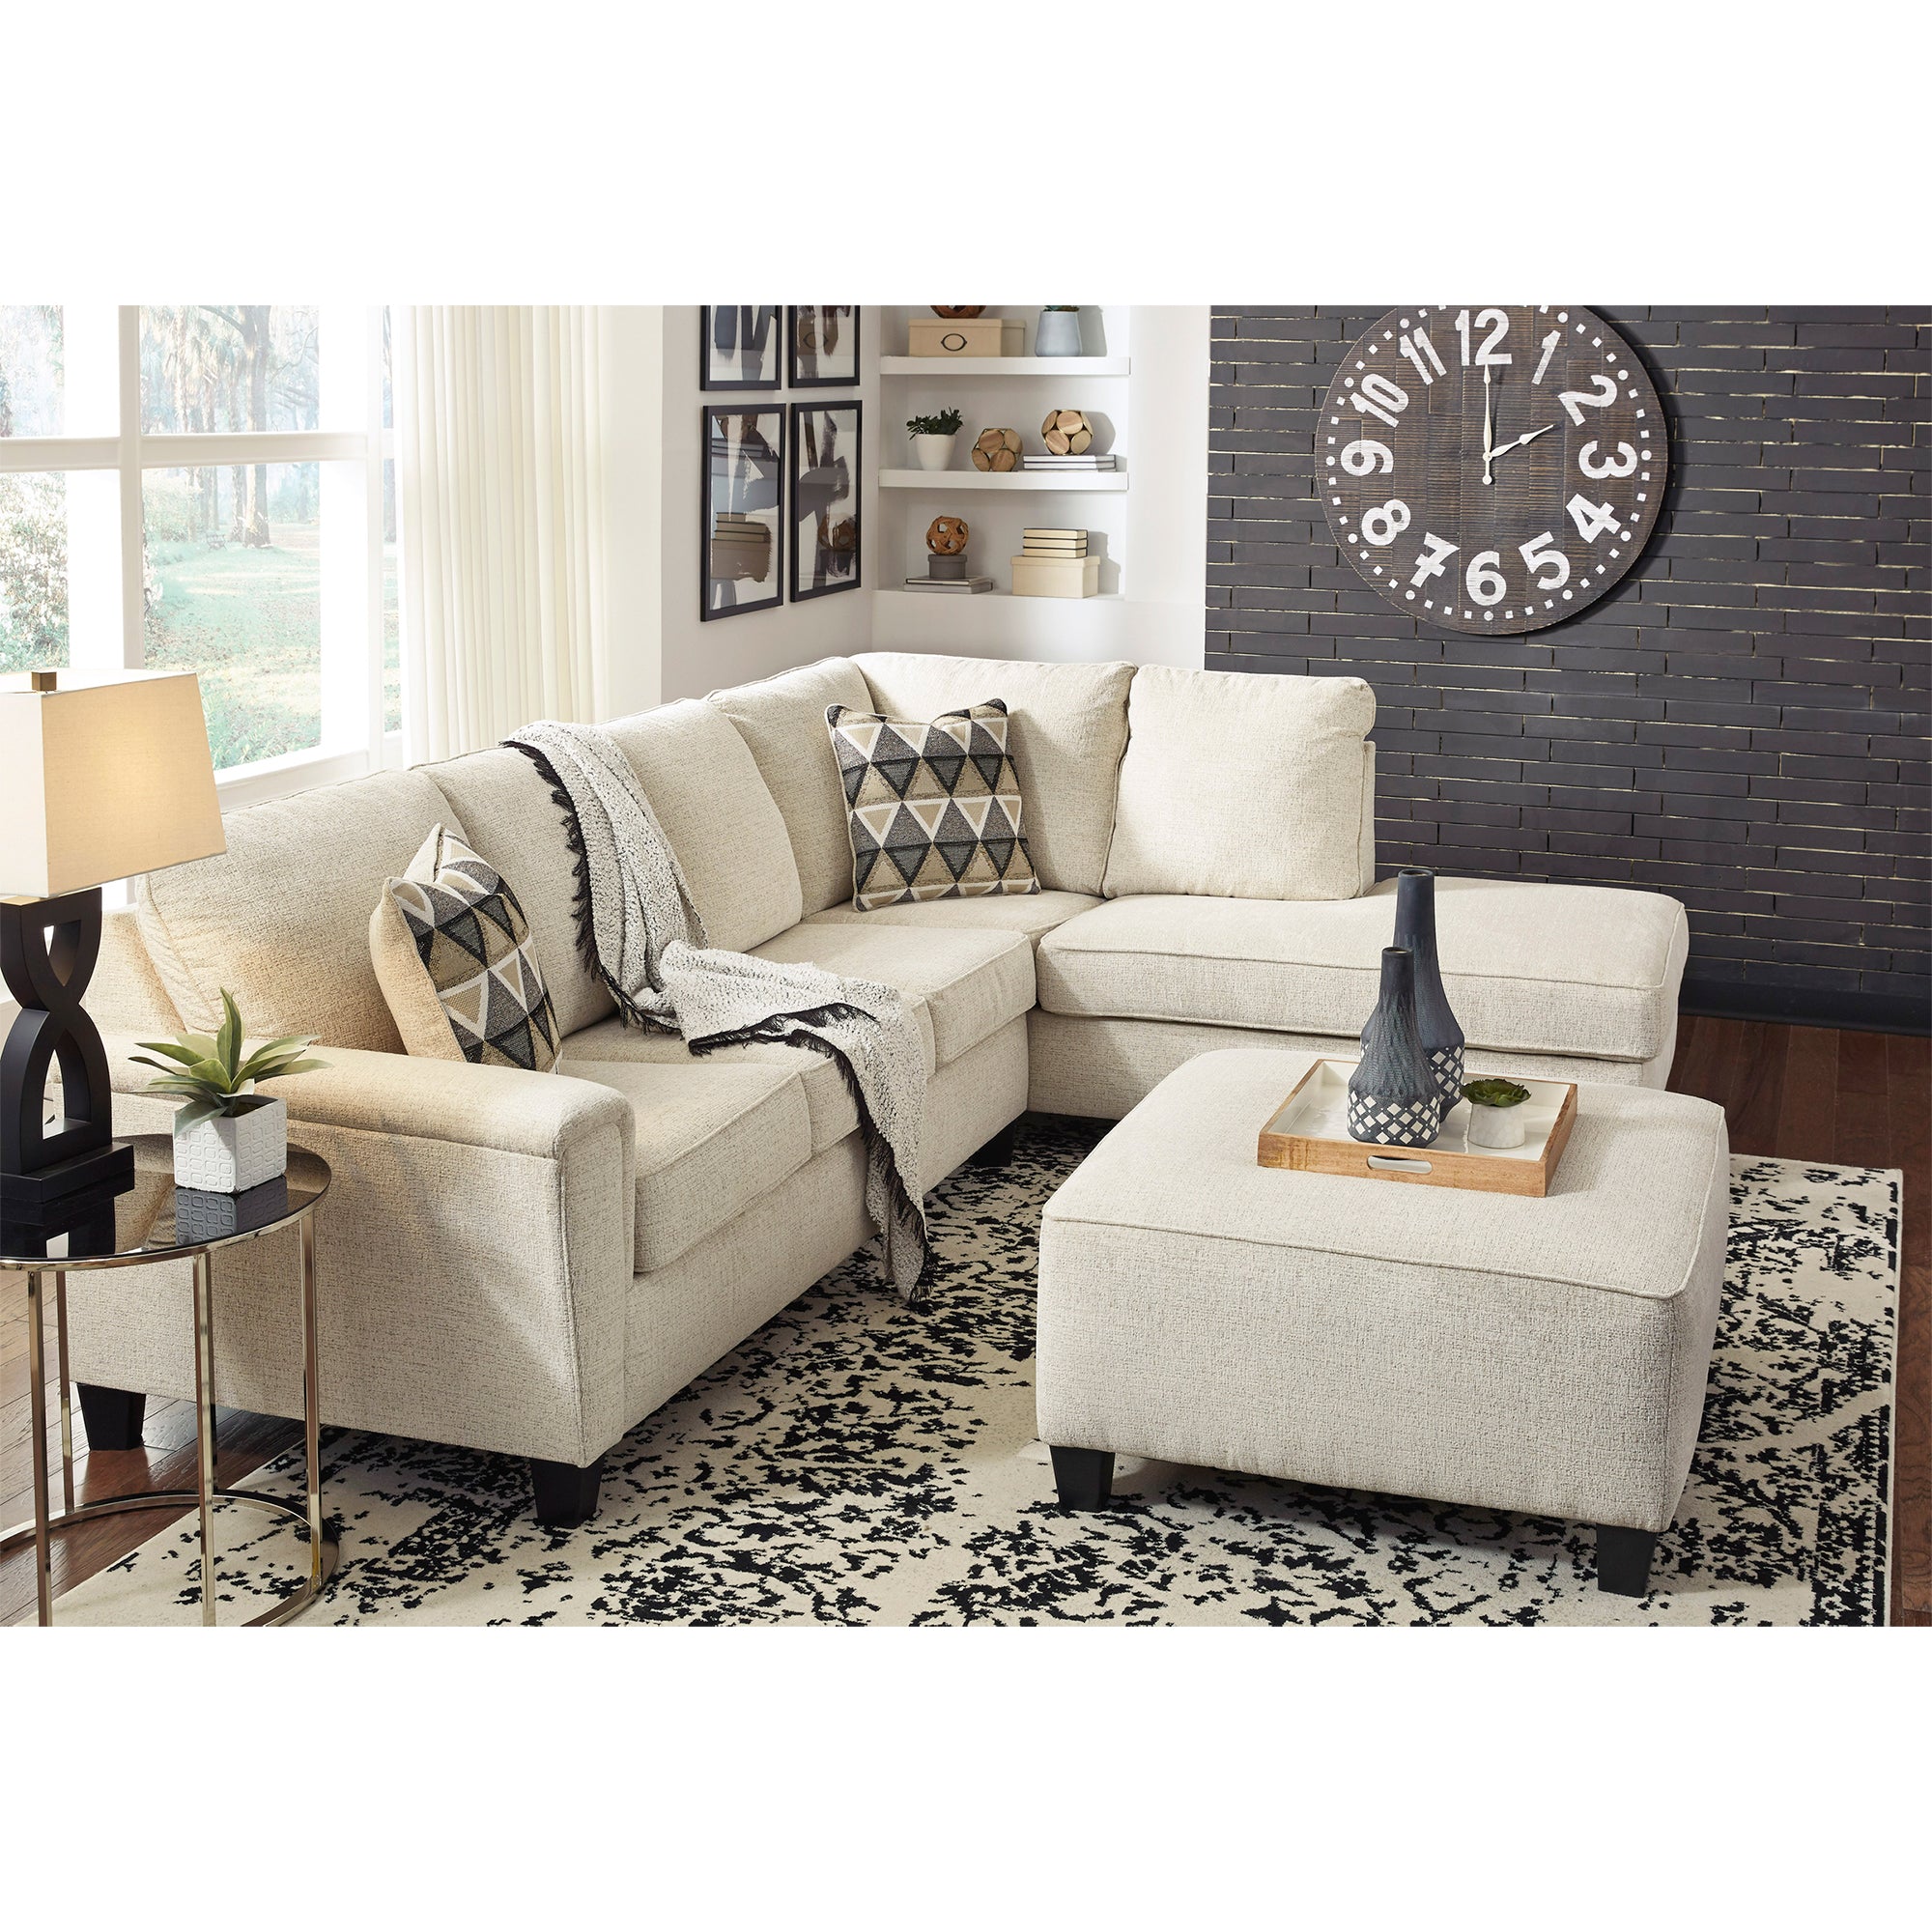 Abinger 2-Piece Sectional with Chaise in Natural Color